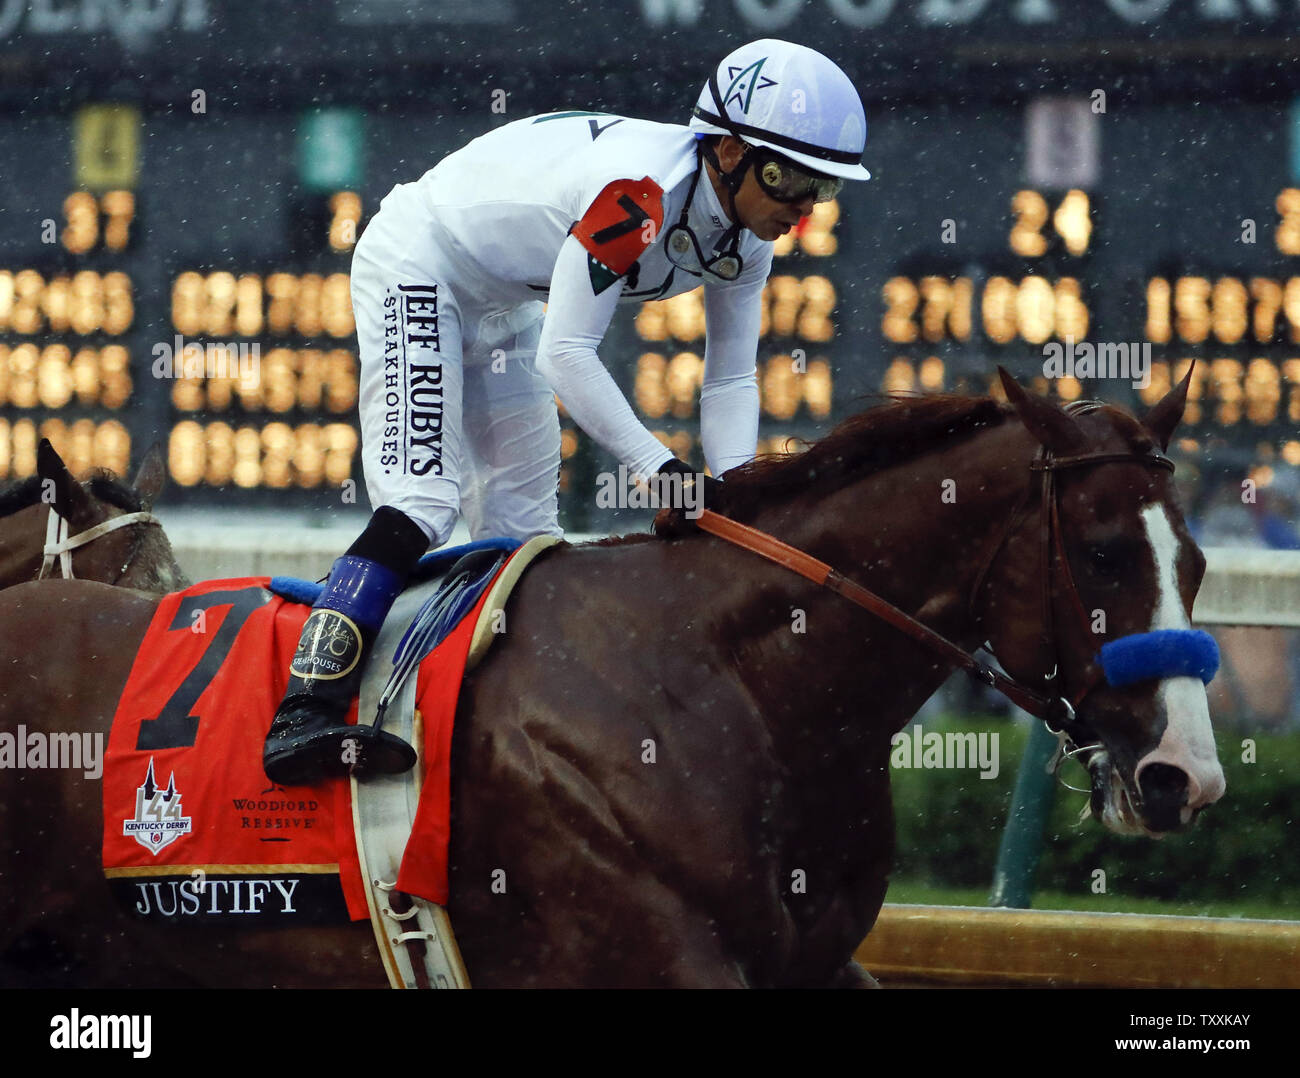 Jockey Mike Smith aboard Justify crosses the finish line to win the 144th Running of the Kentucky Derby on May 5, 2018 at Churchill Downs in Louisville Kentucky. Photo by Jason Szenes/UPI Stock Photo